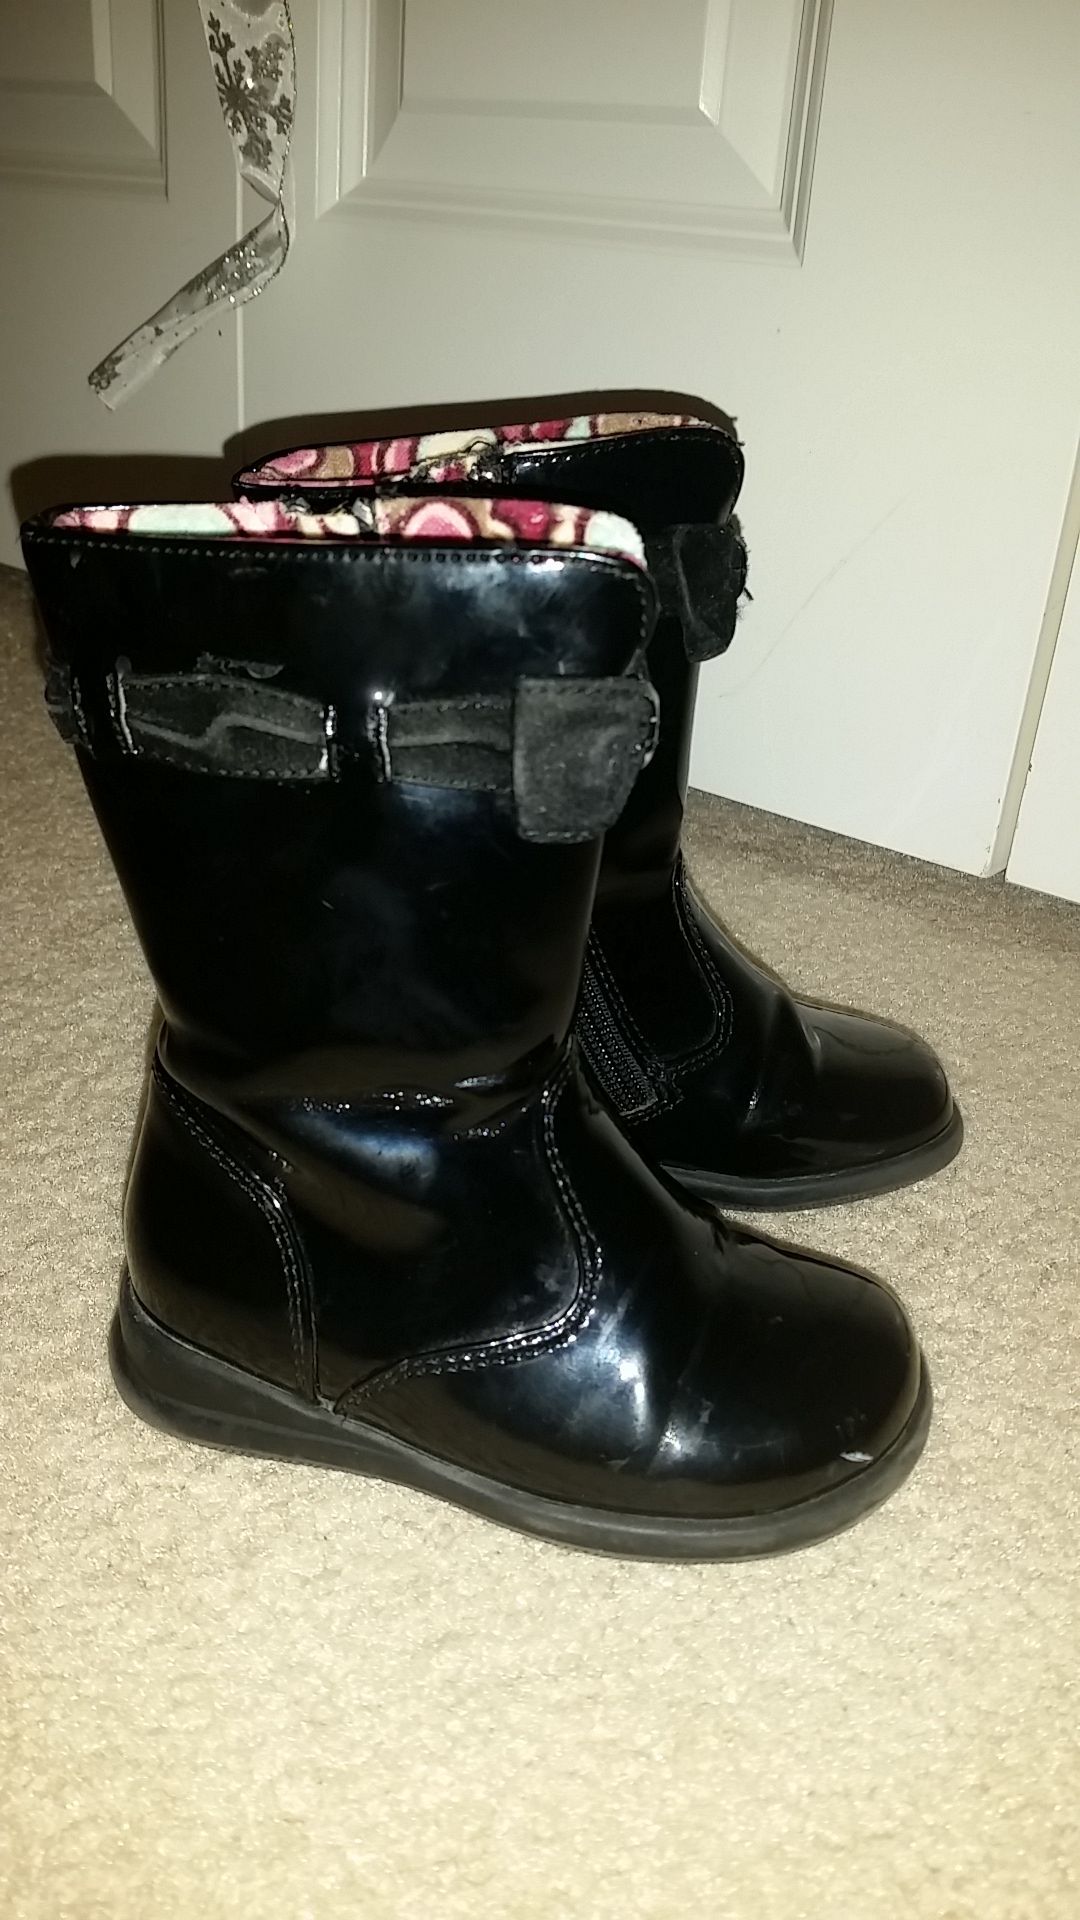 Baby Girl boots size 7